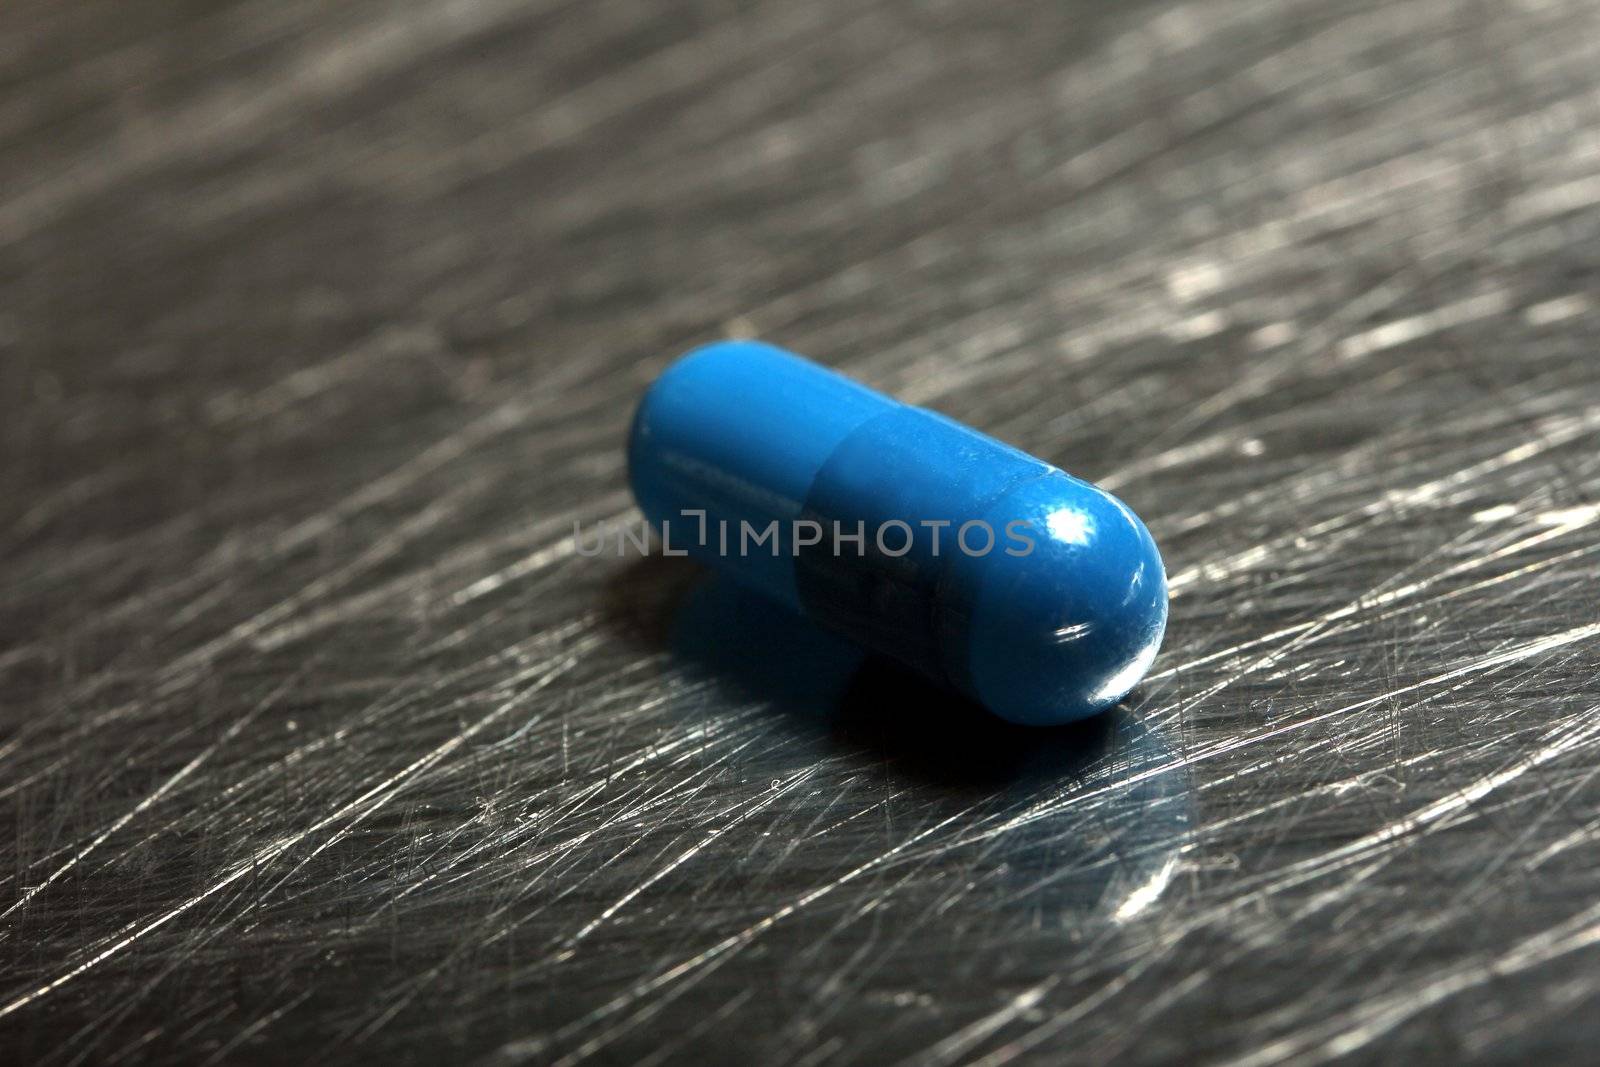 colored medicinical capsule on a steel plate